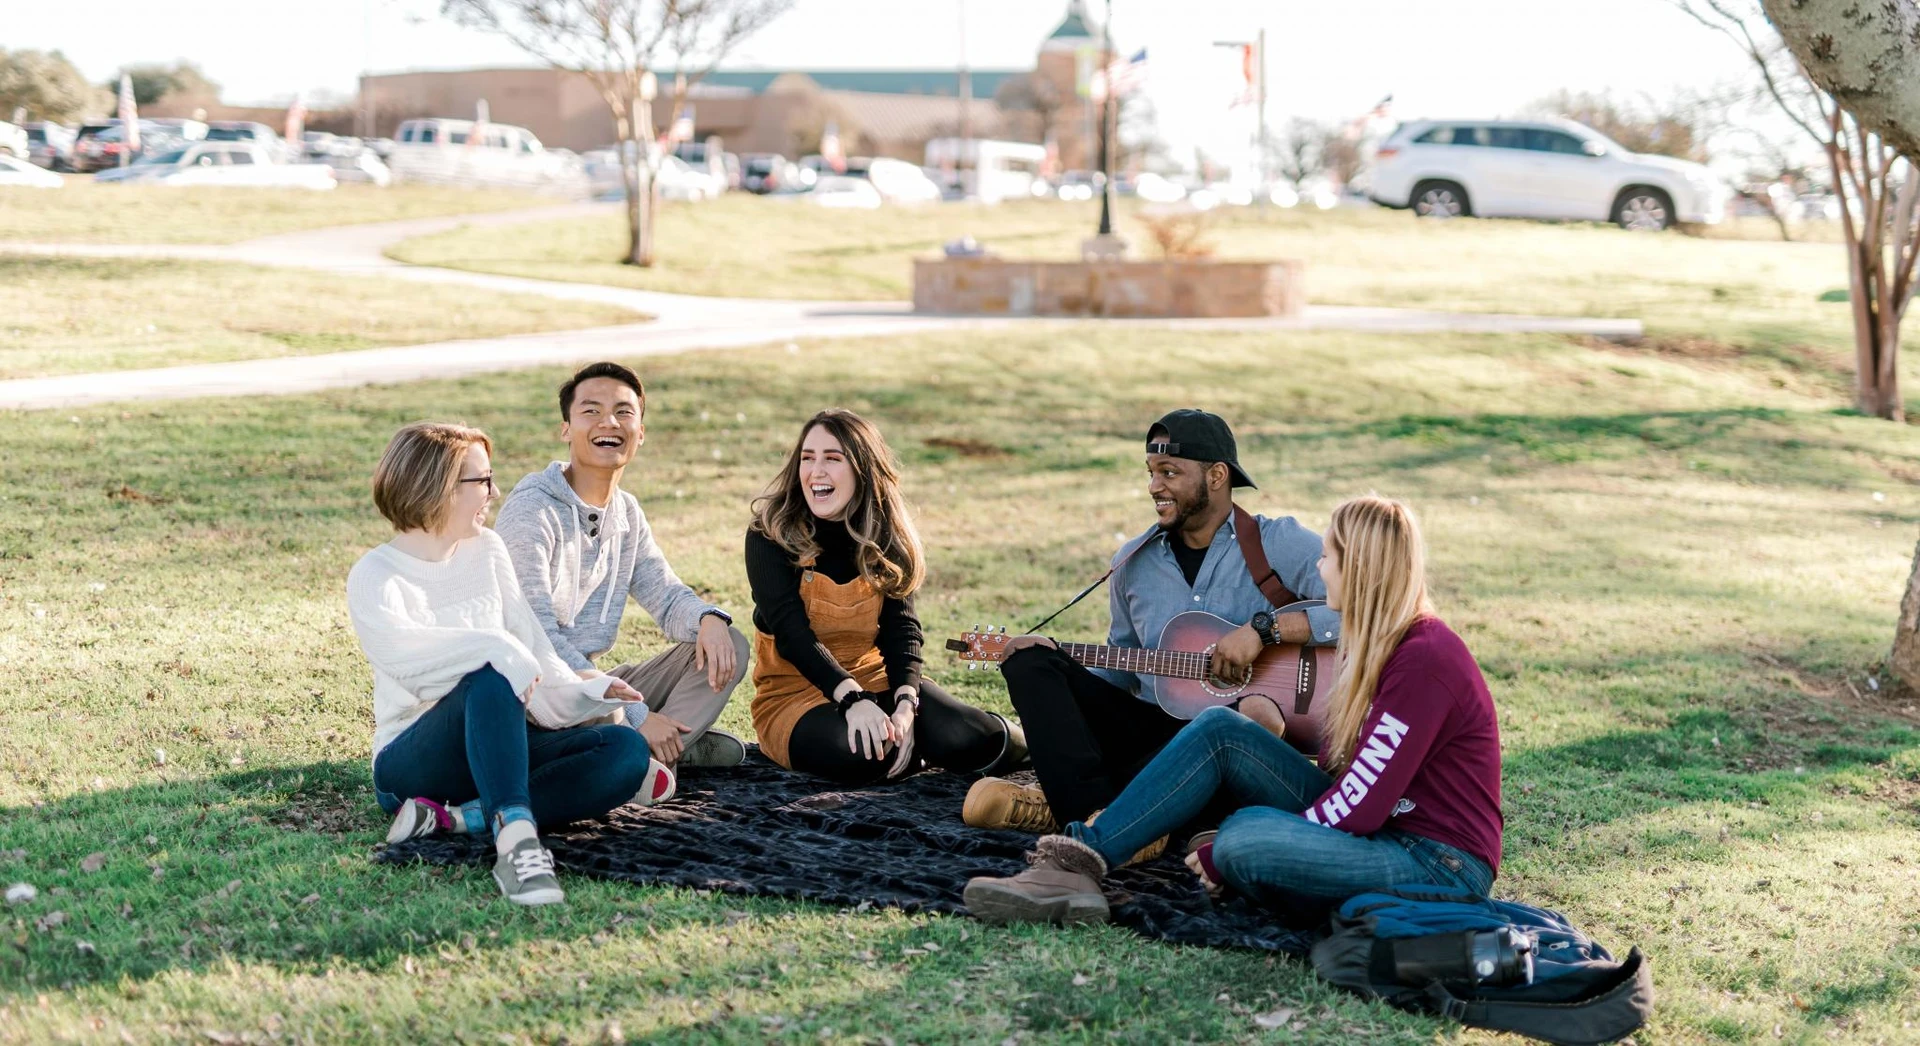 Five students sit under a tree on a blanket laughing and singing as one studentplays the guitar